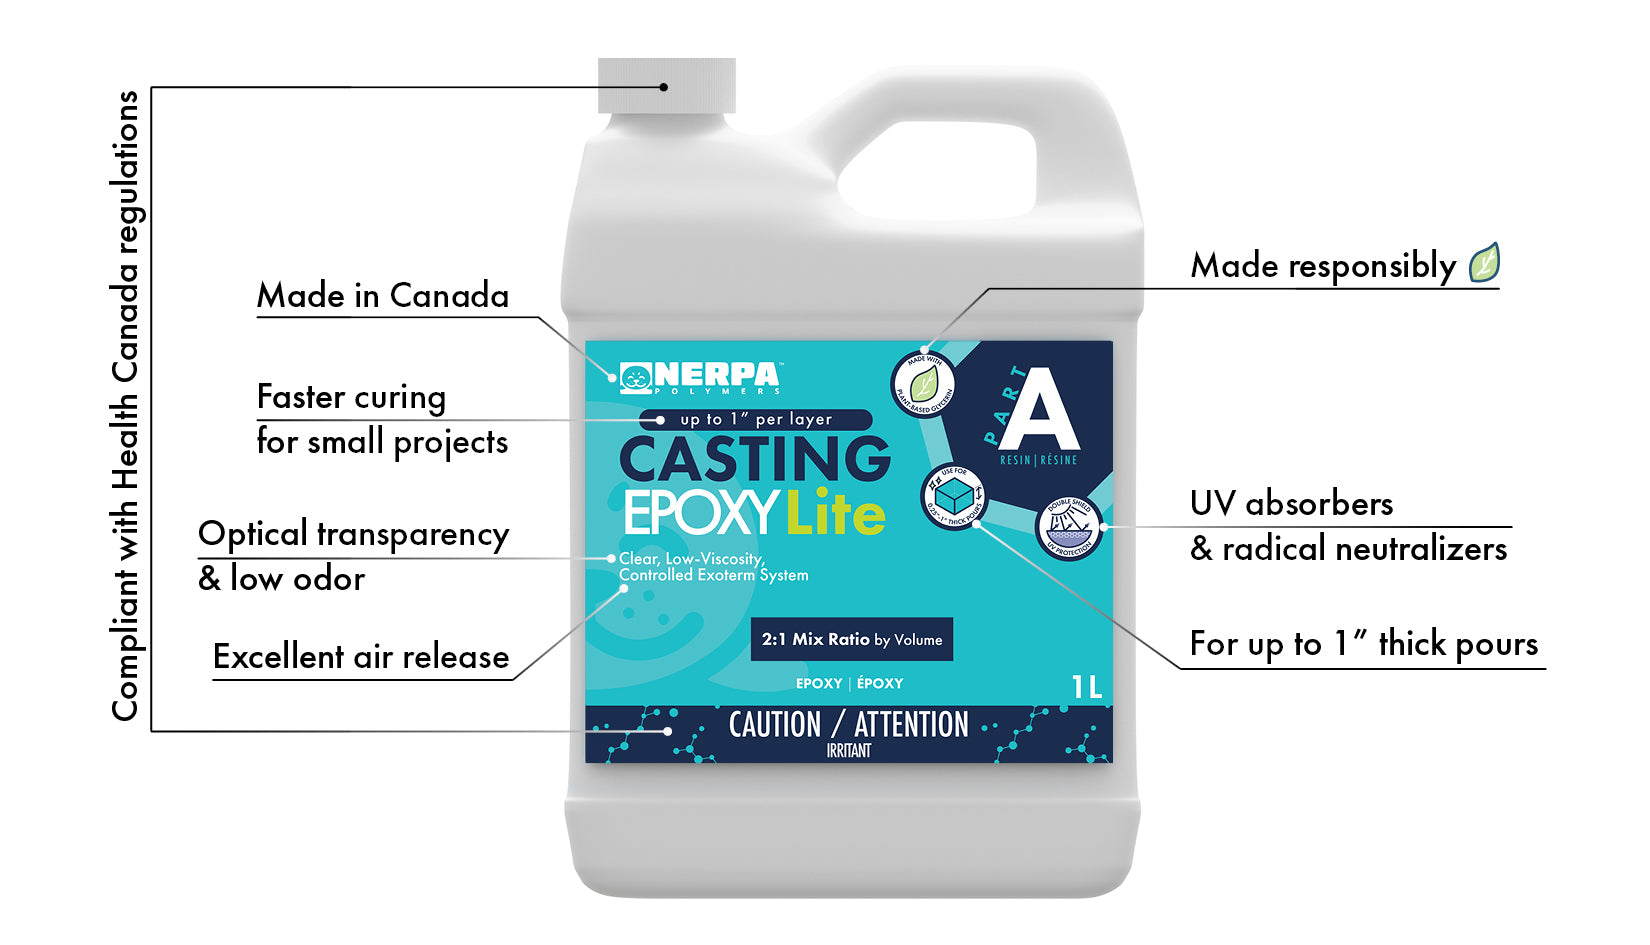 Casting Epoxy Lite combines key features such as low viscosity, excellent optical transparency, advanced UV protection reduced demolding time.  All of these packed into a biobased epoxy!